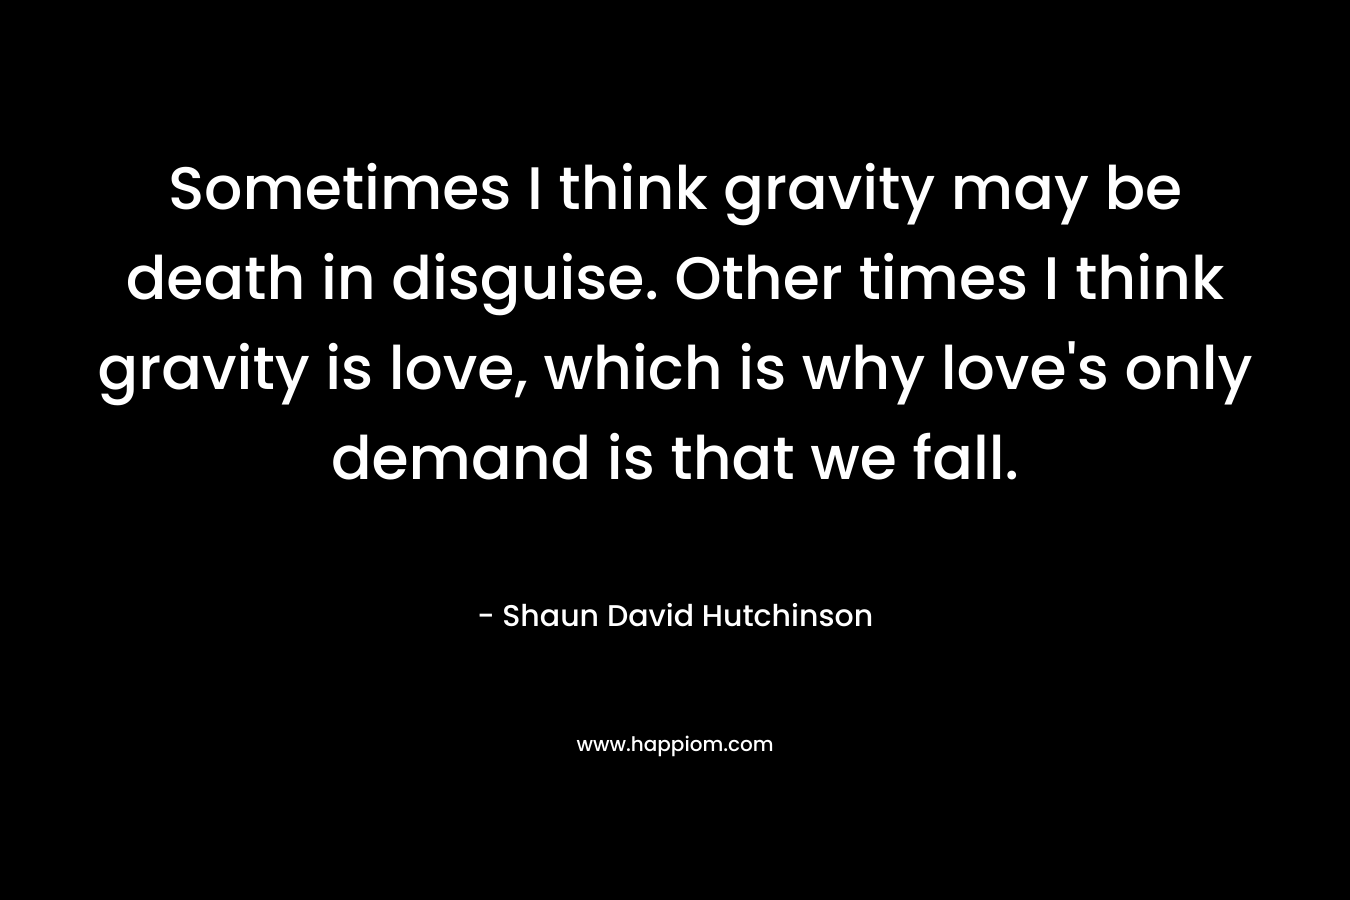 Sometimes I think gravity may be death in disguise. Other times I think gravity is love, which is why love's only demand is that we fall.